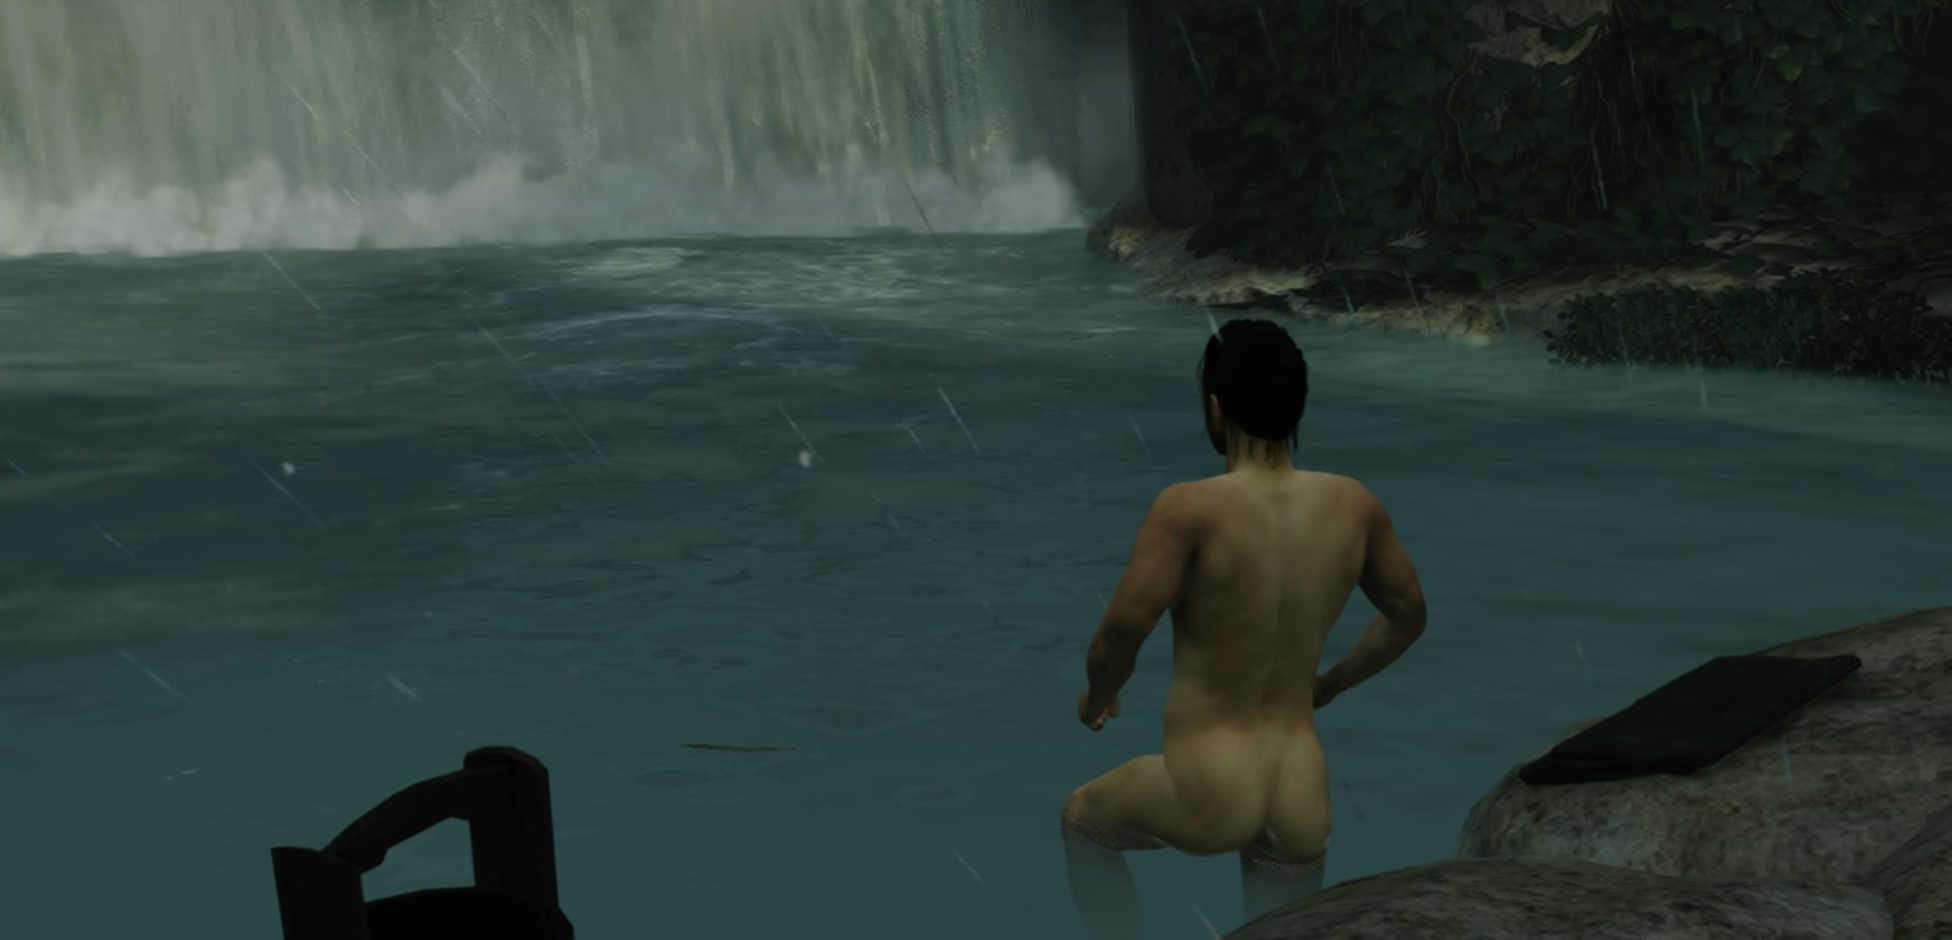 jin's bare ass as he descends into a pool of water near a waterfall